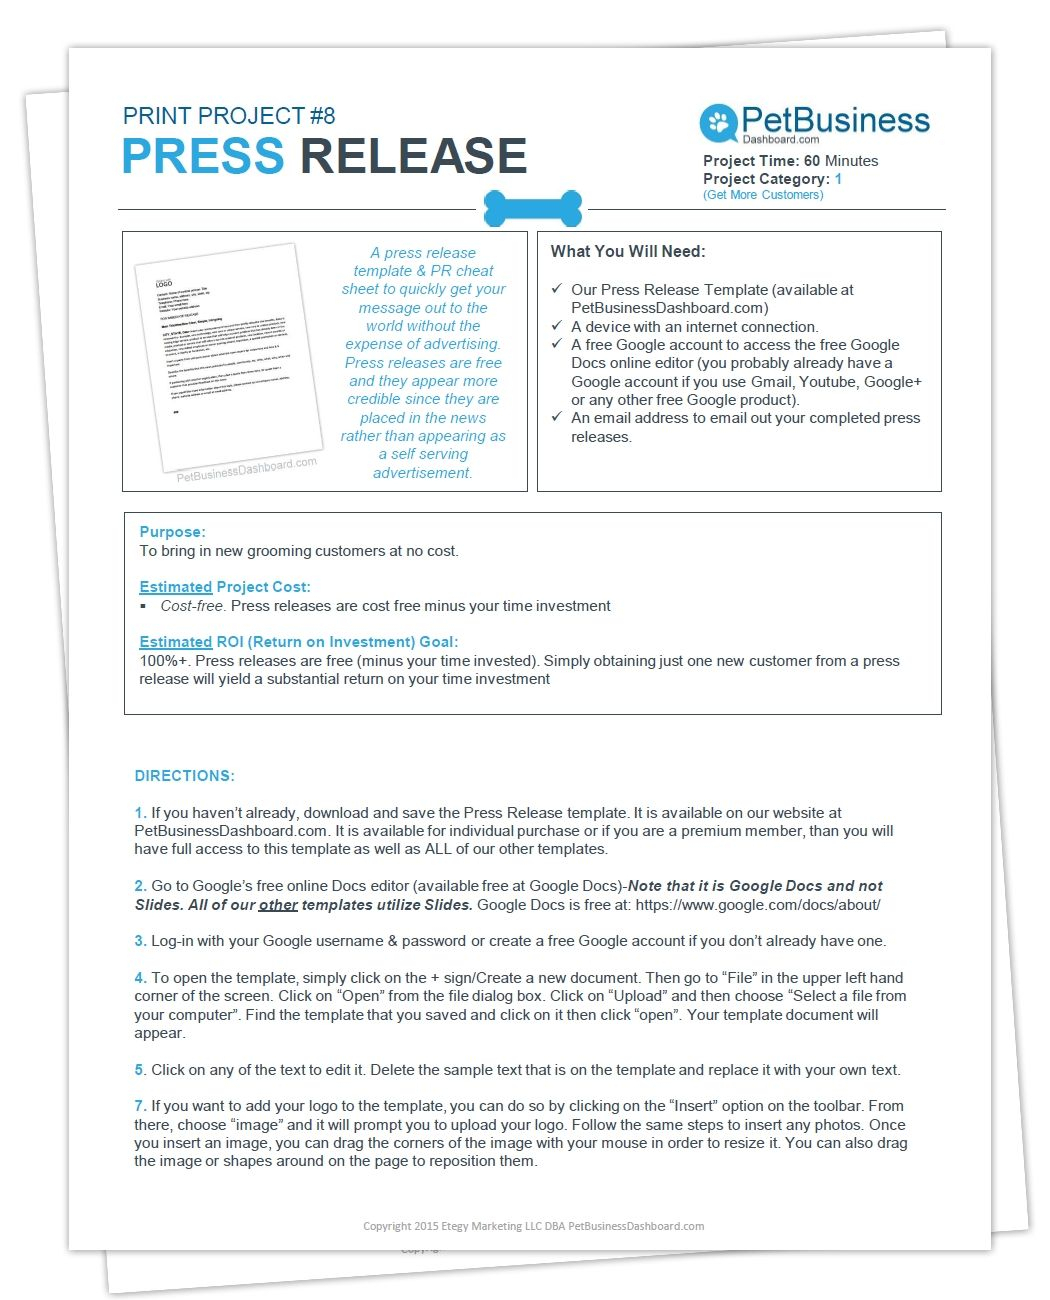 Press Release Template & Cheat Sheet | Dog Grooming Business Within Dog Grooming Record Card Template